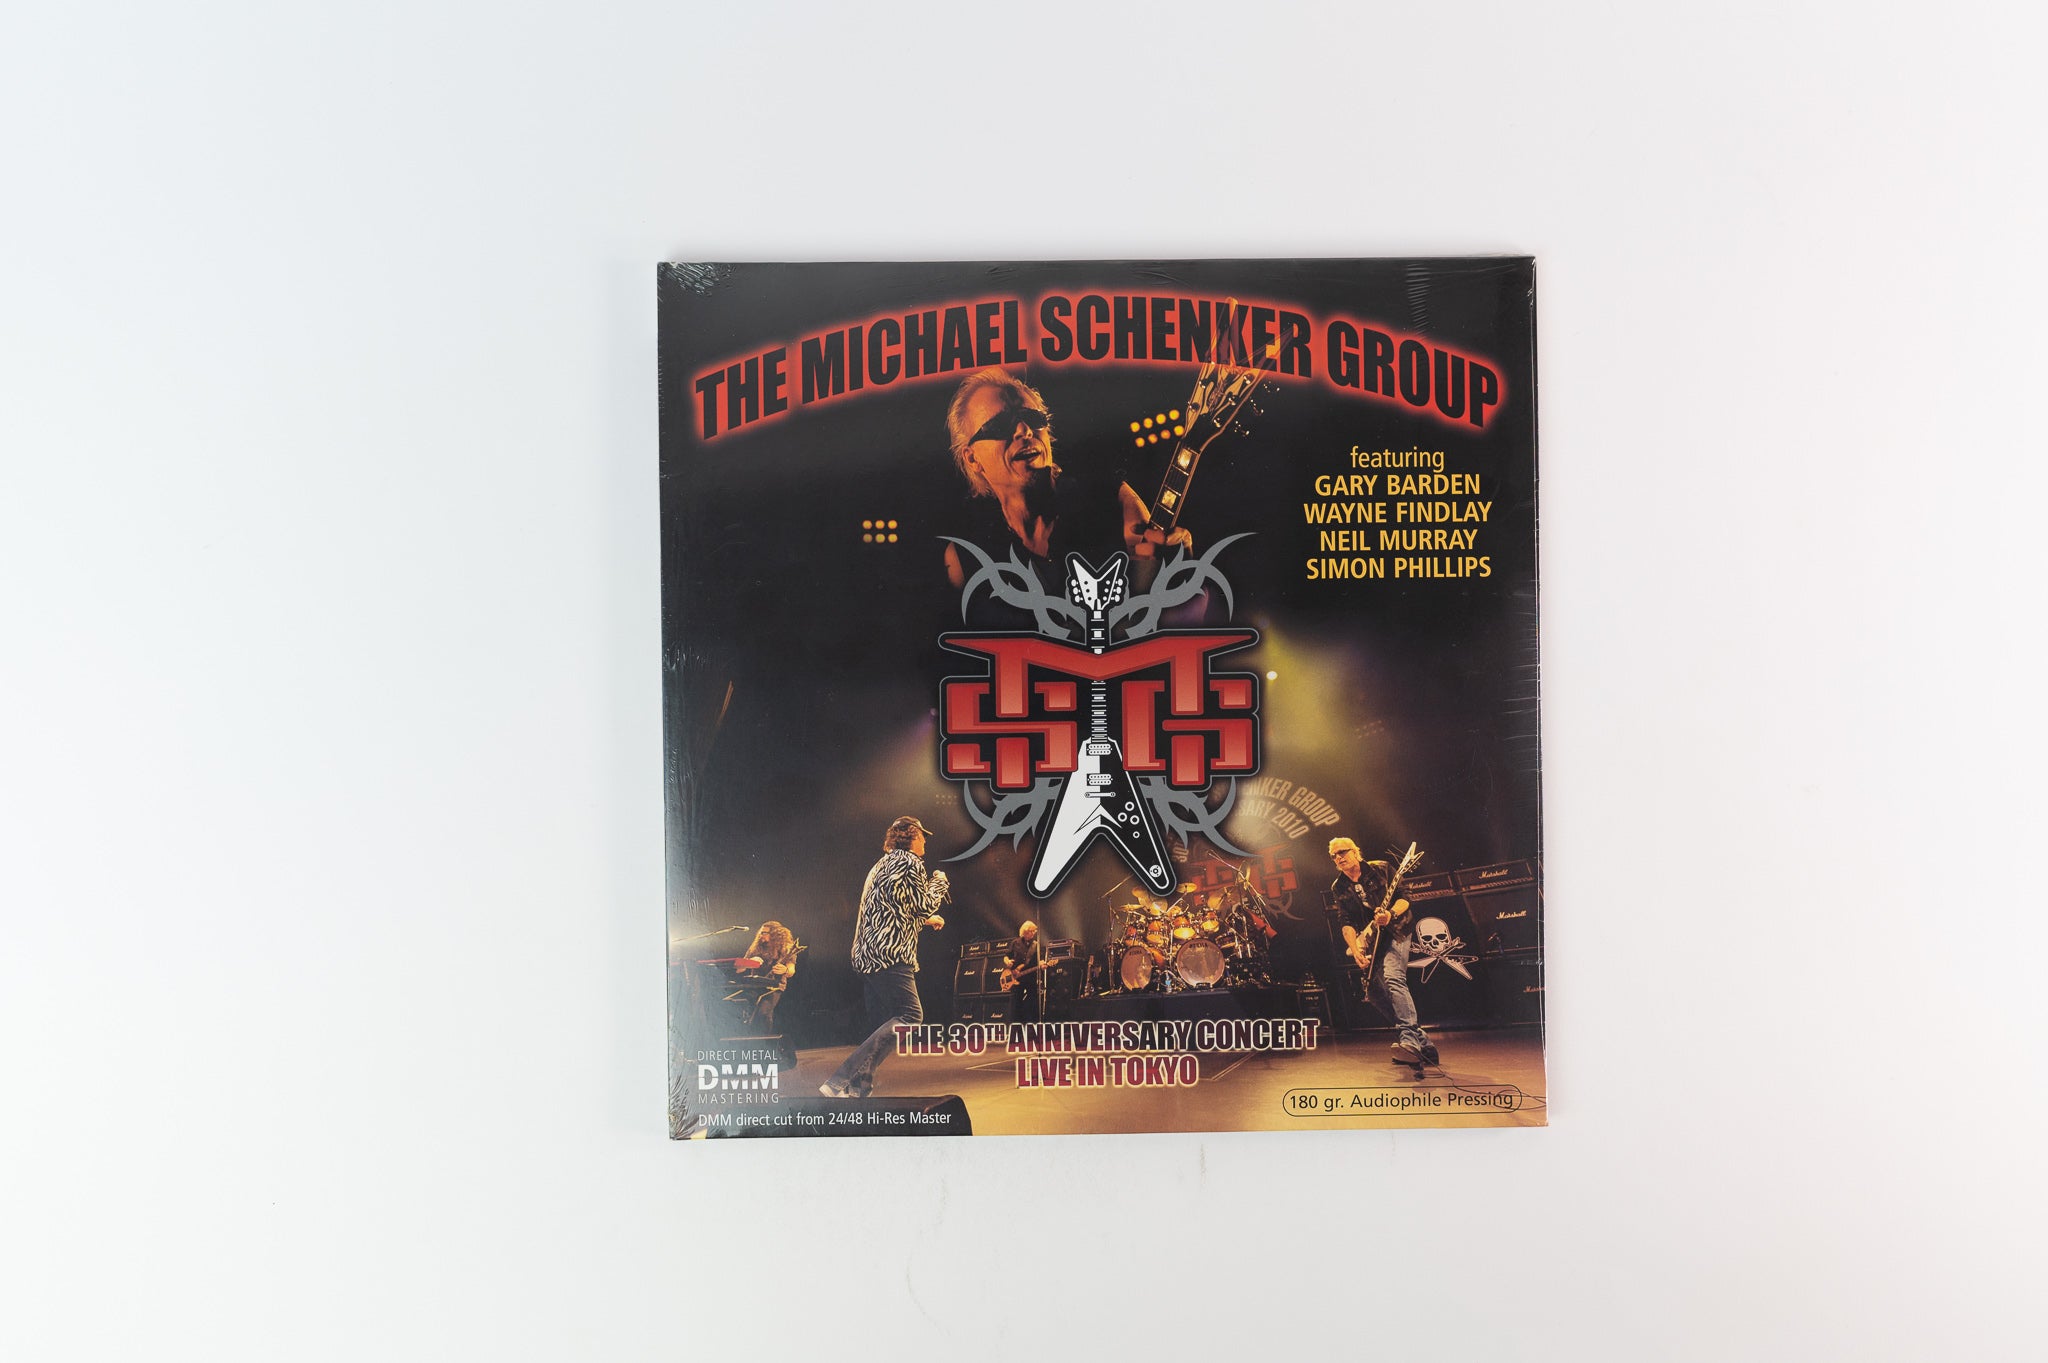 The Michael Schenker Group - The 30th Anniversary Concert - Live In Tokyo on in-akustik German Pressing Sealed